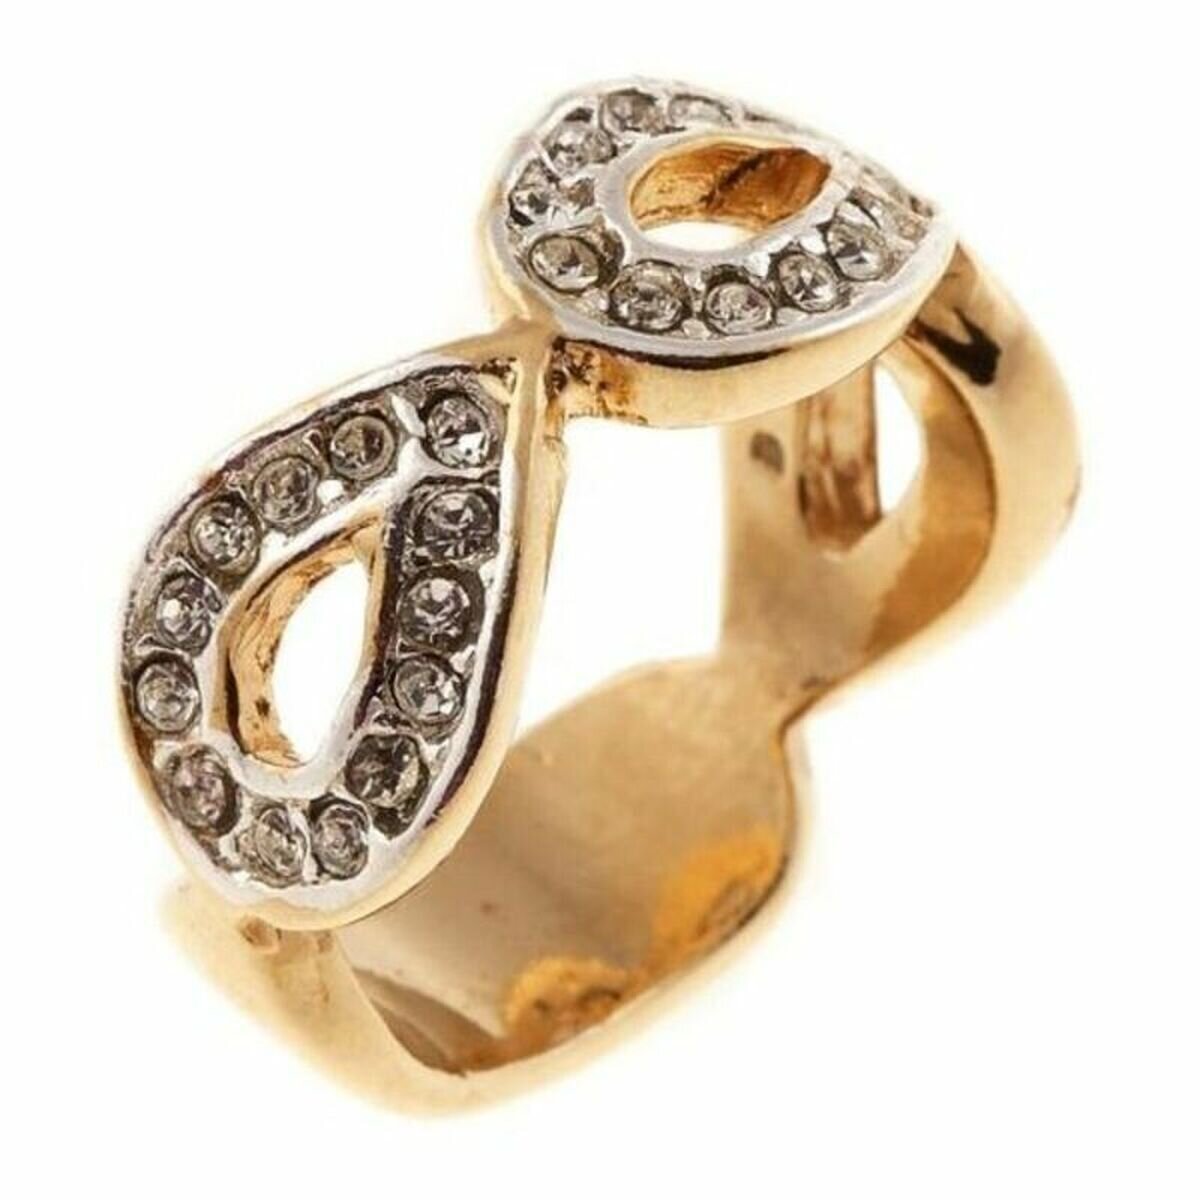 Ladies Cristian Lay Ring 43328140 (Size 14)